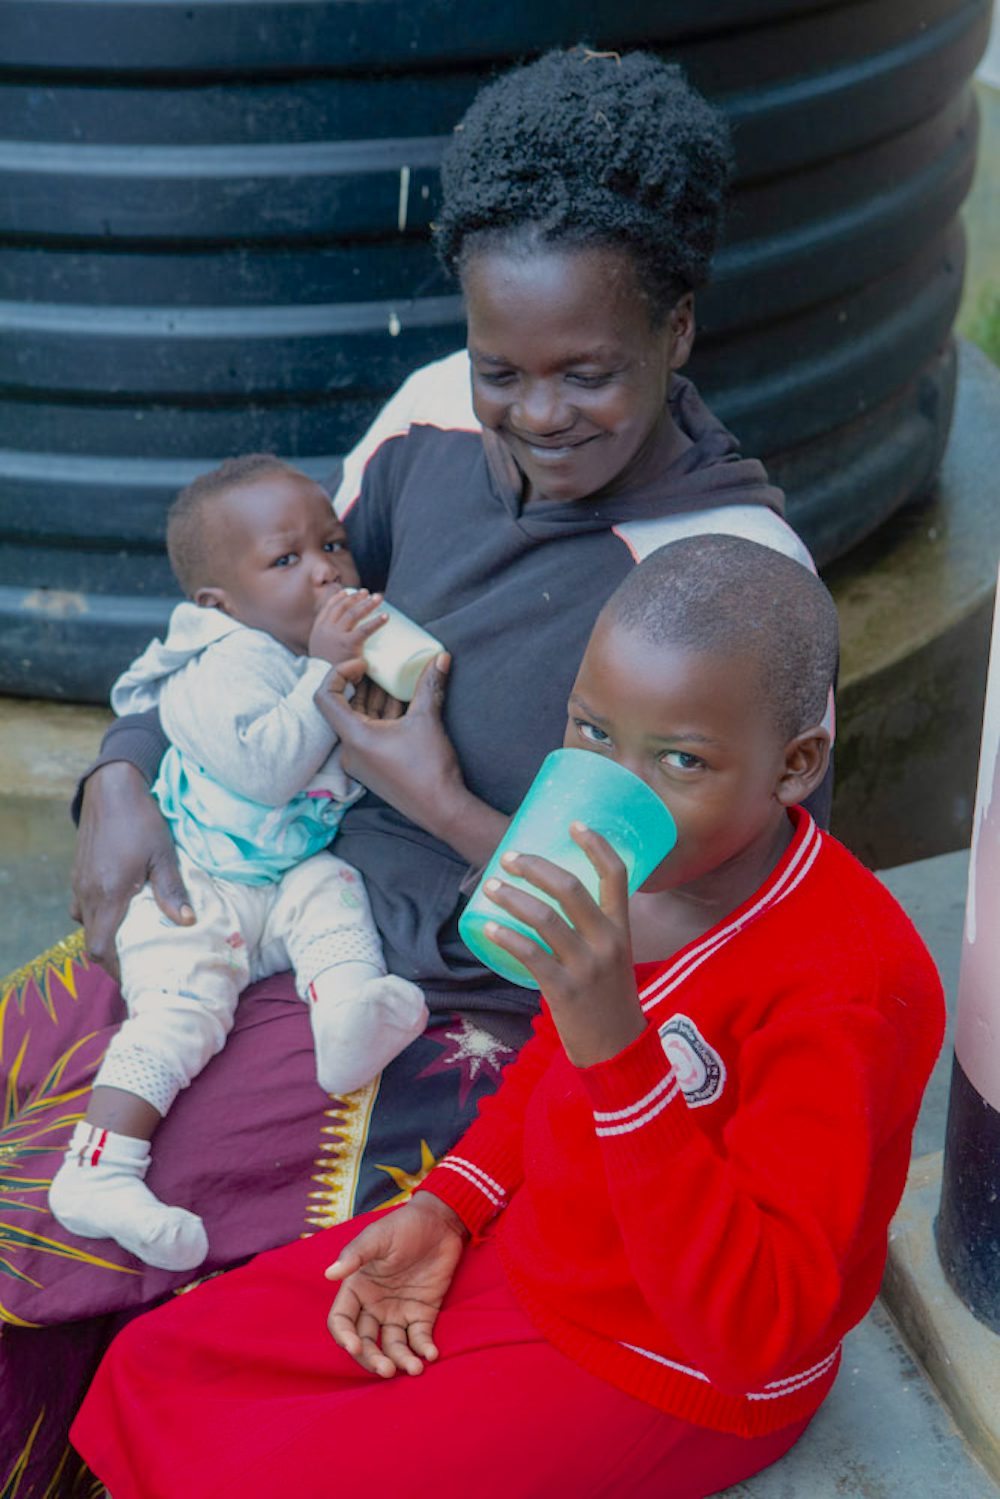 A woman on a step cradles a toddler while another child drinks from a cup.